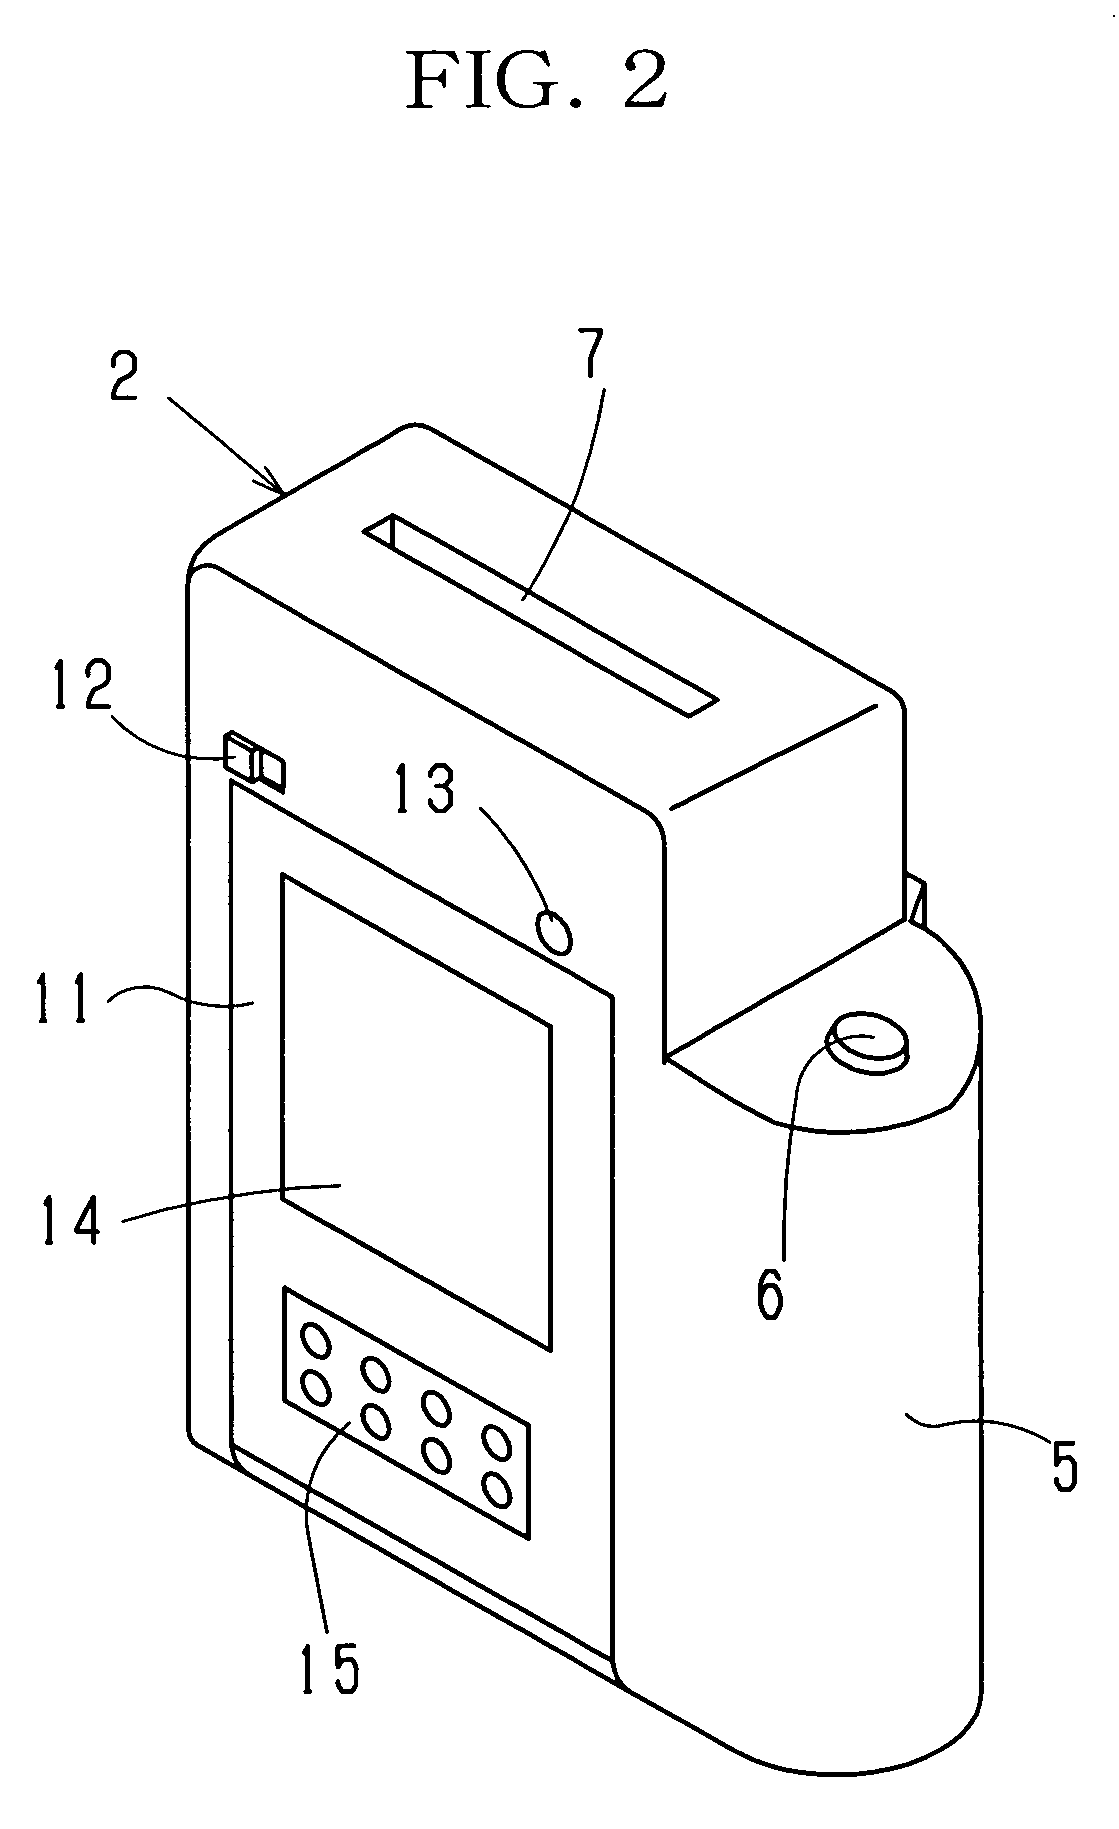 Instant printer, printing method for using the same, combination printer/electronic still camera system